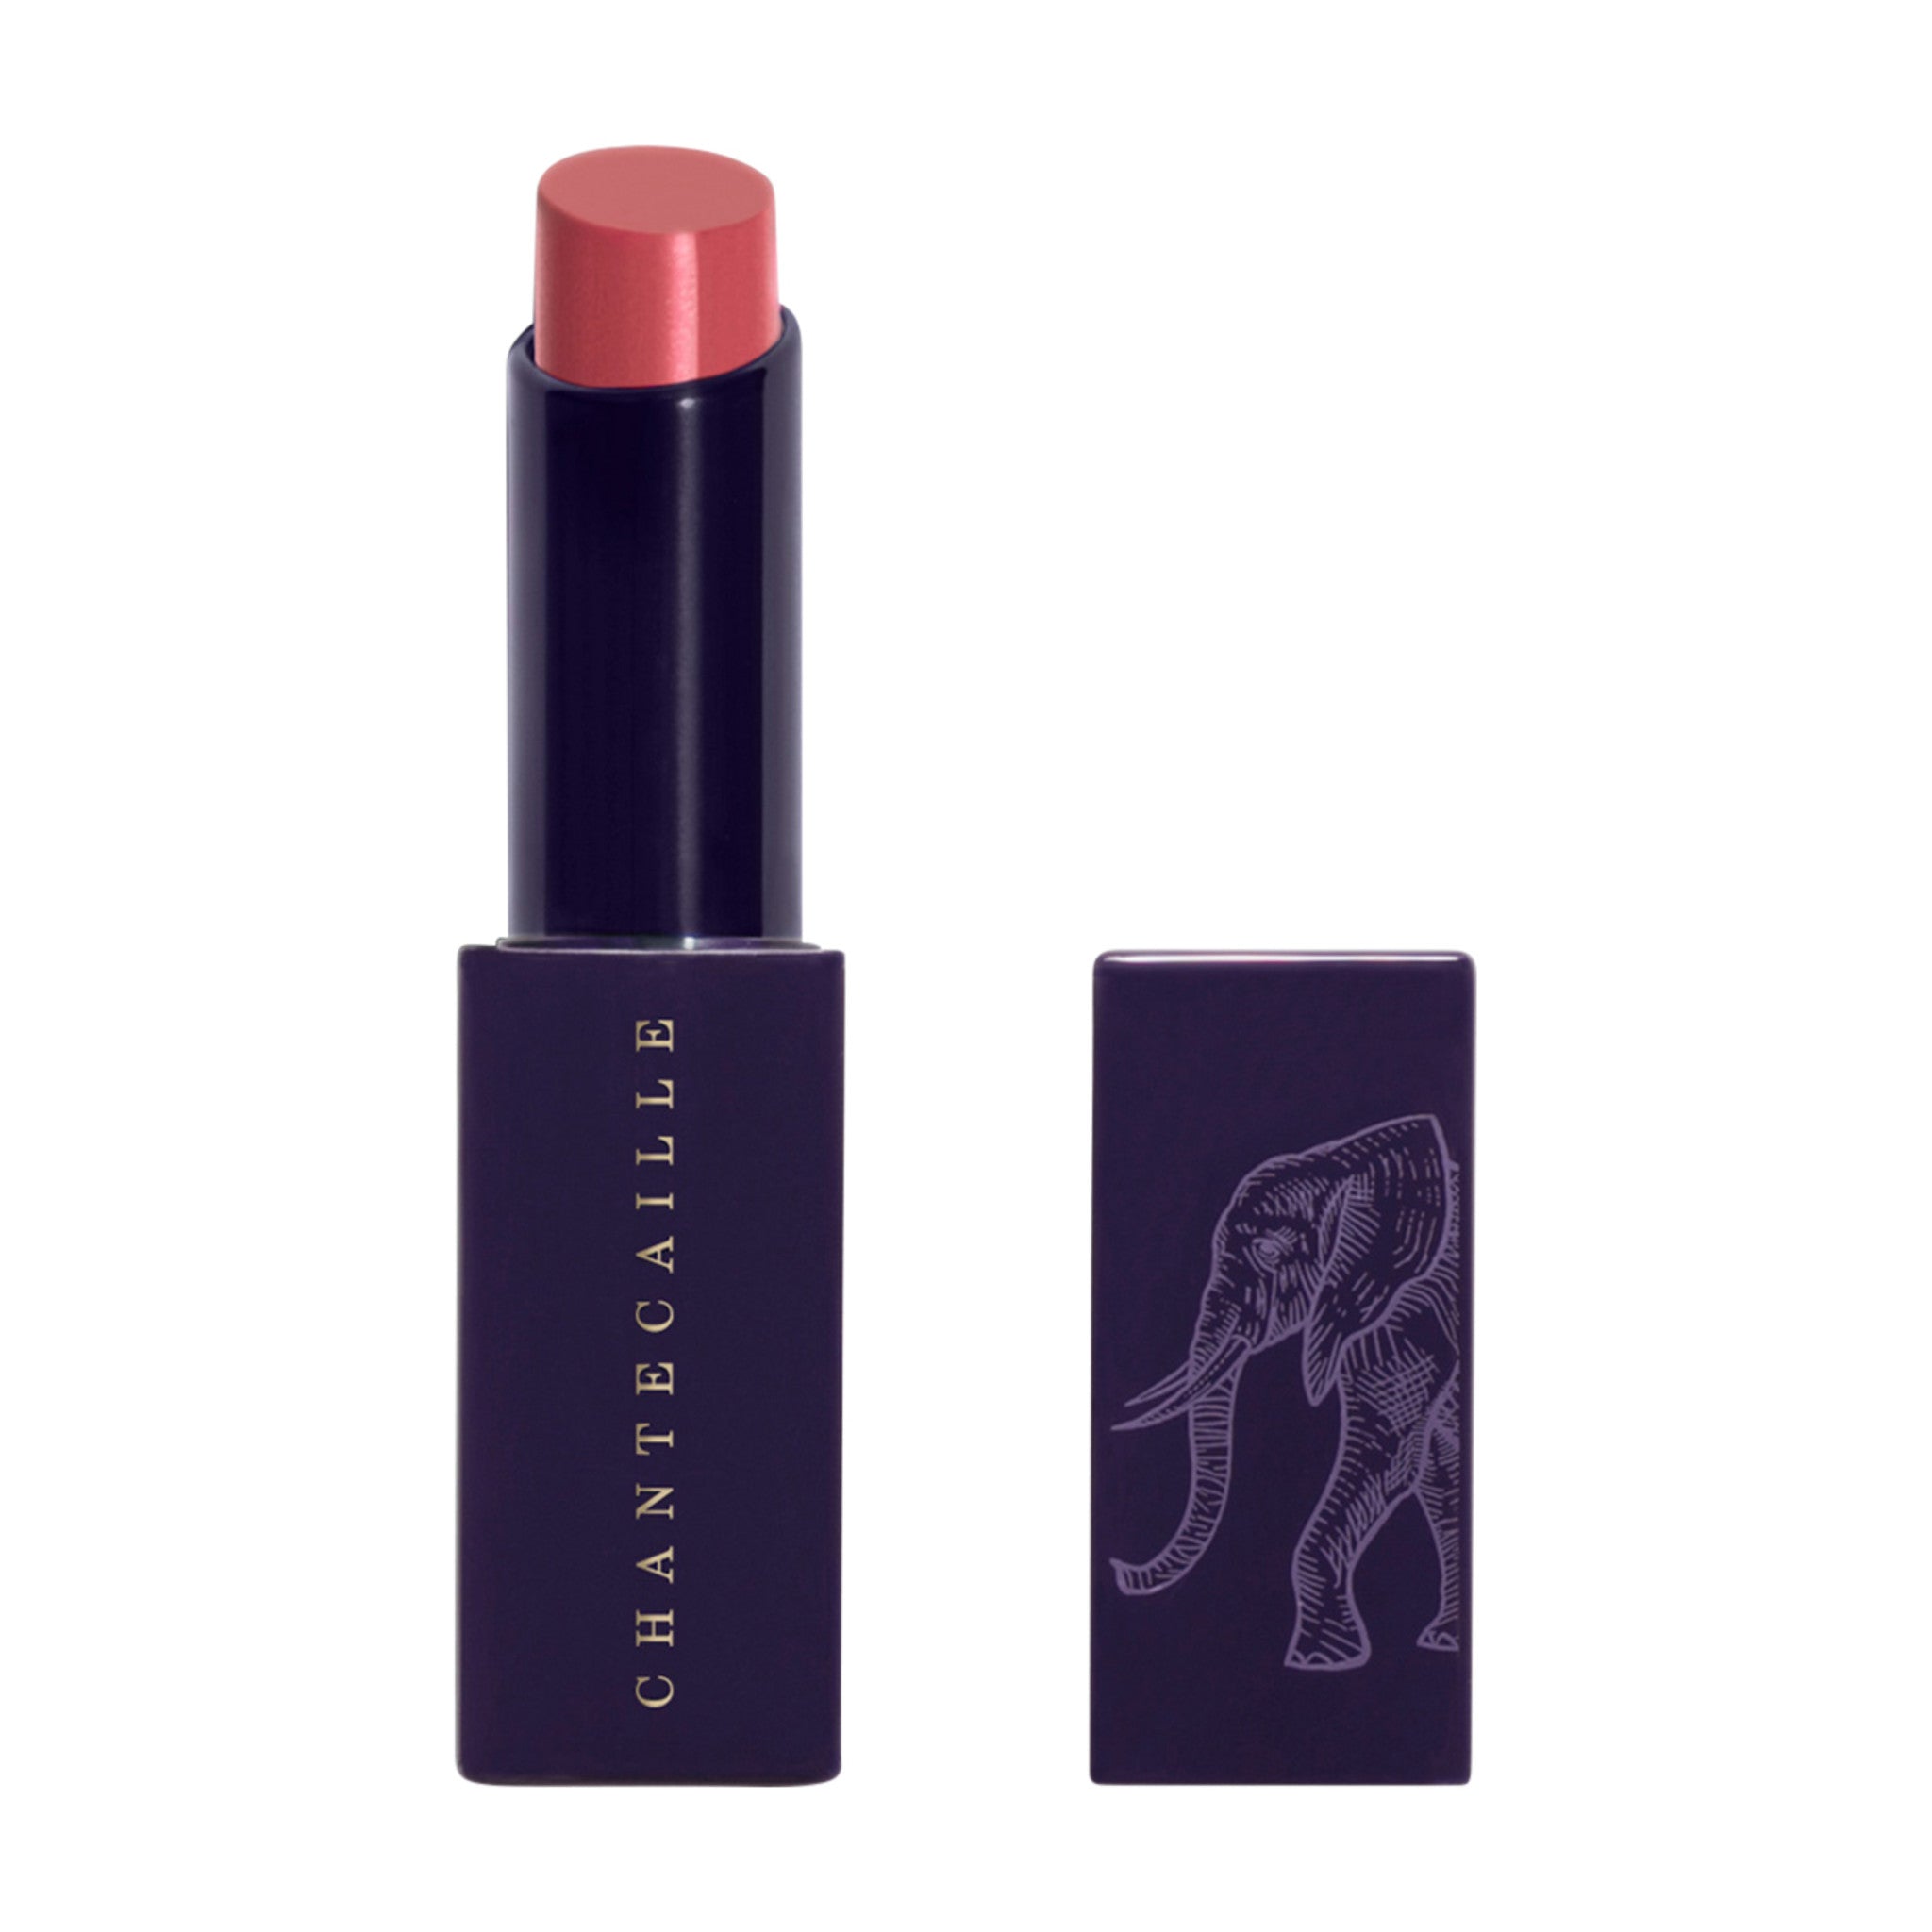 Chantecaille Lip Veil Color/Shade variant: Baobab main image. This product is in the color pink